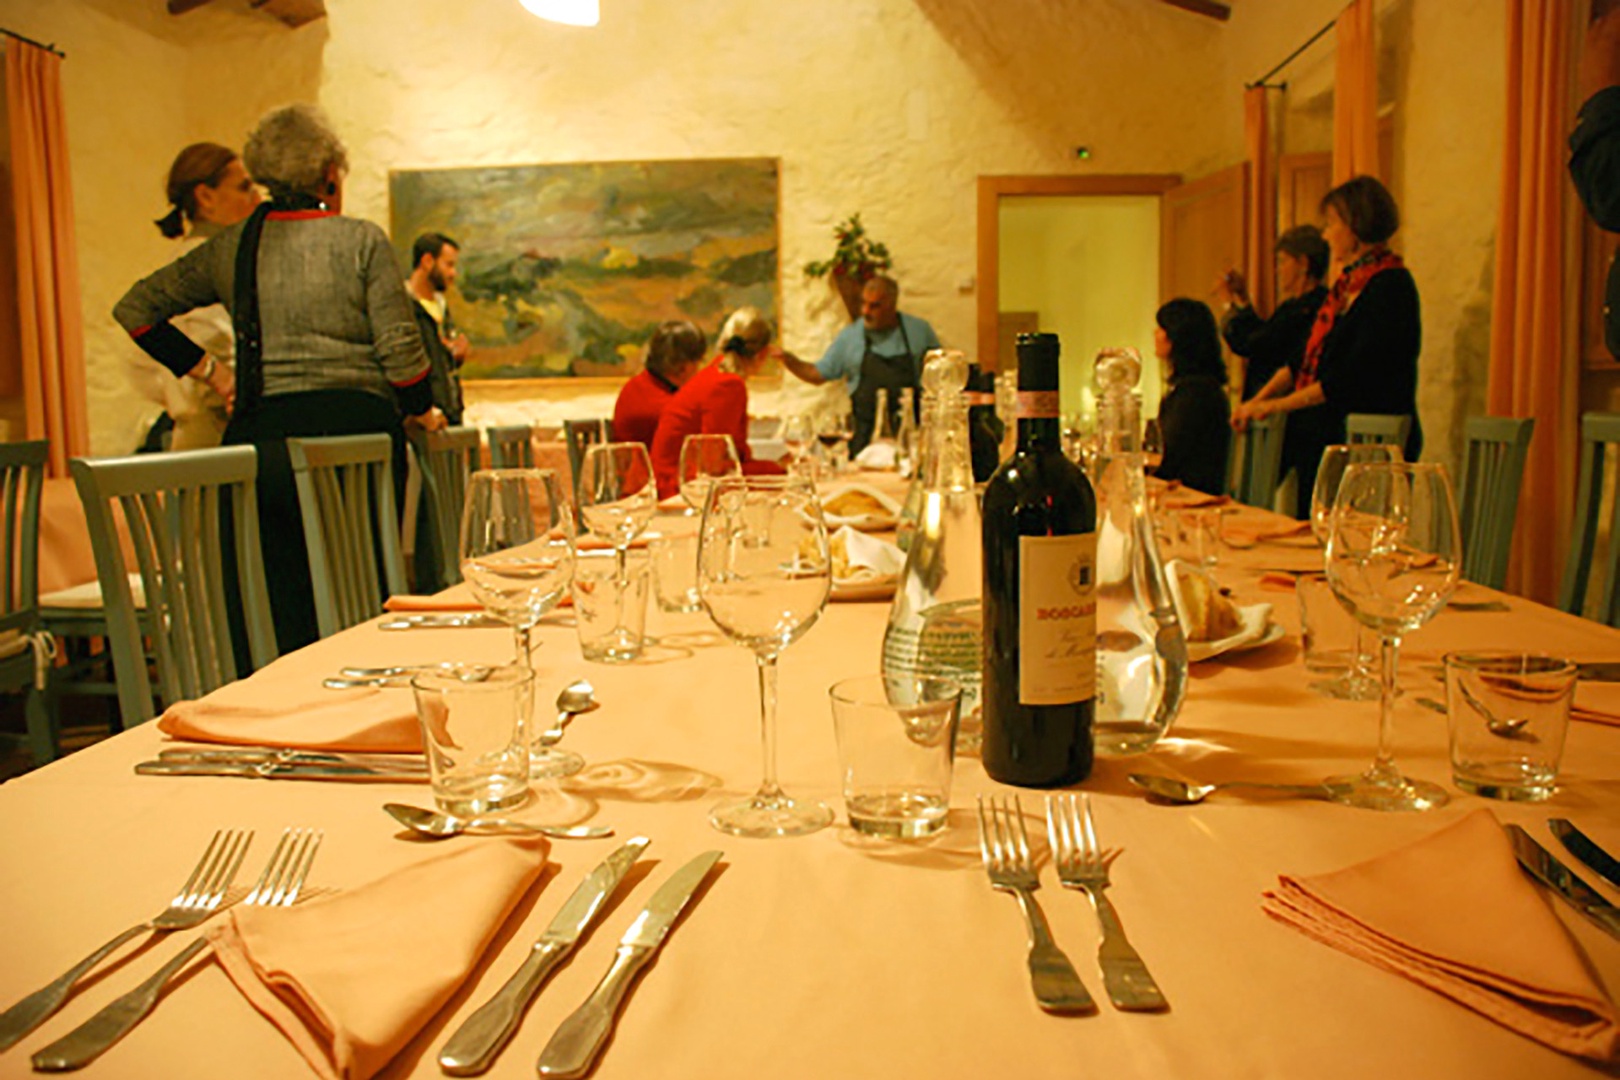 A group dinner is served in the estate dining room situated right off the courtyard.